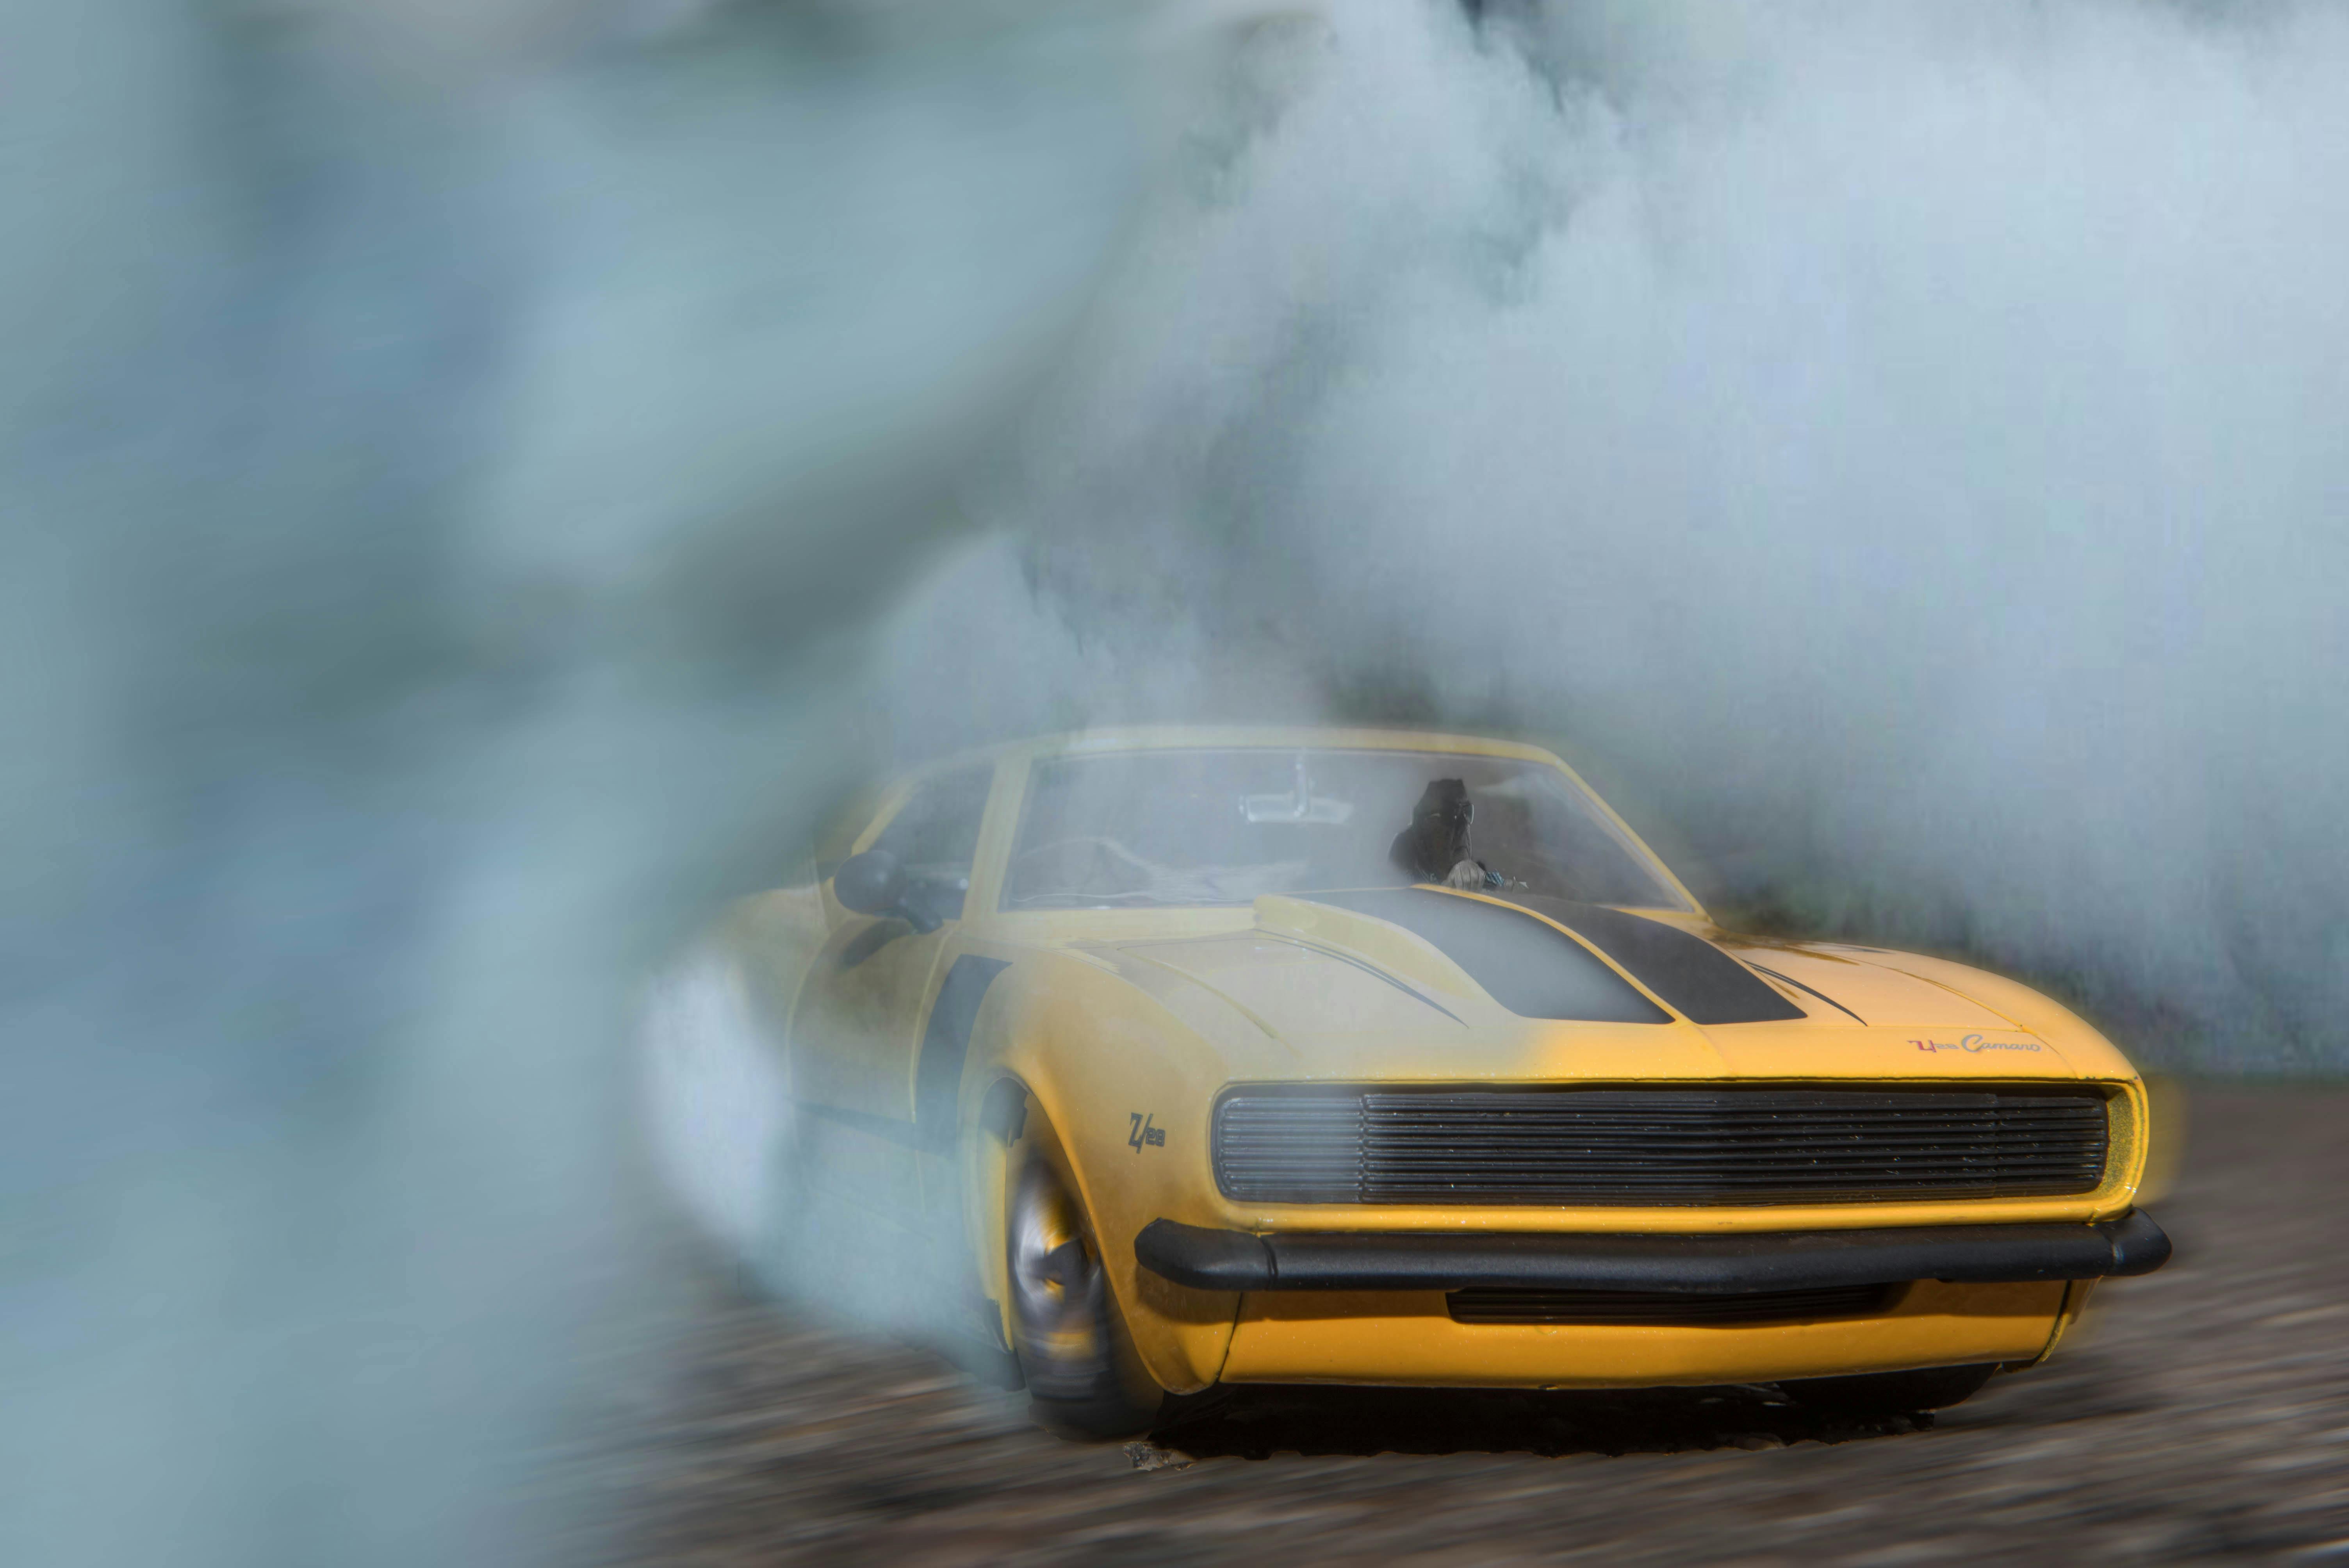 Drifting Photos Download The BEST Free Drifting Stock Photos  HD Images